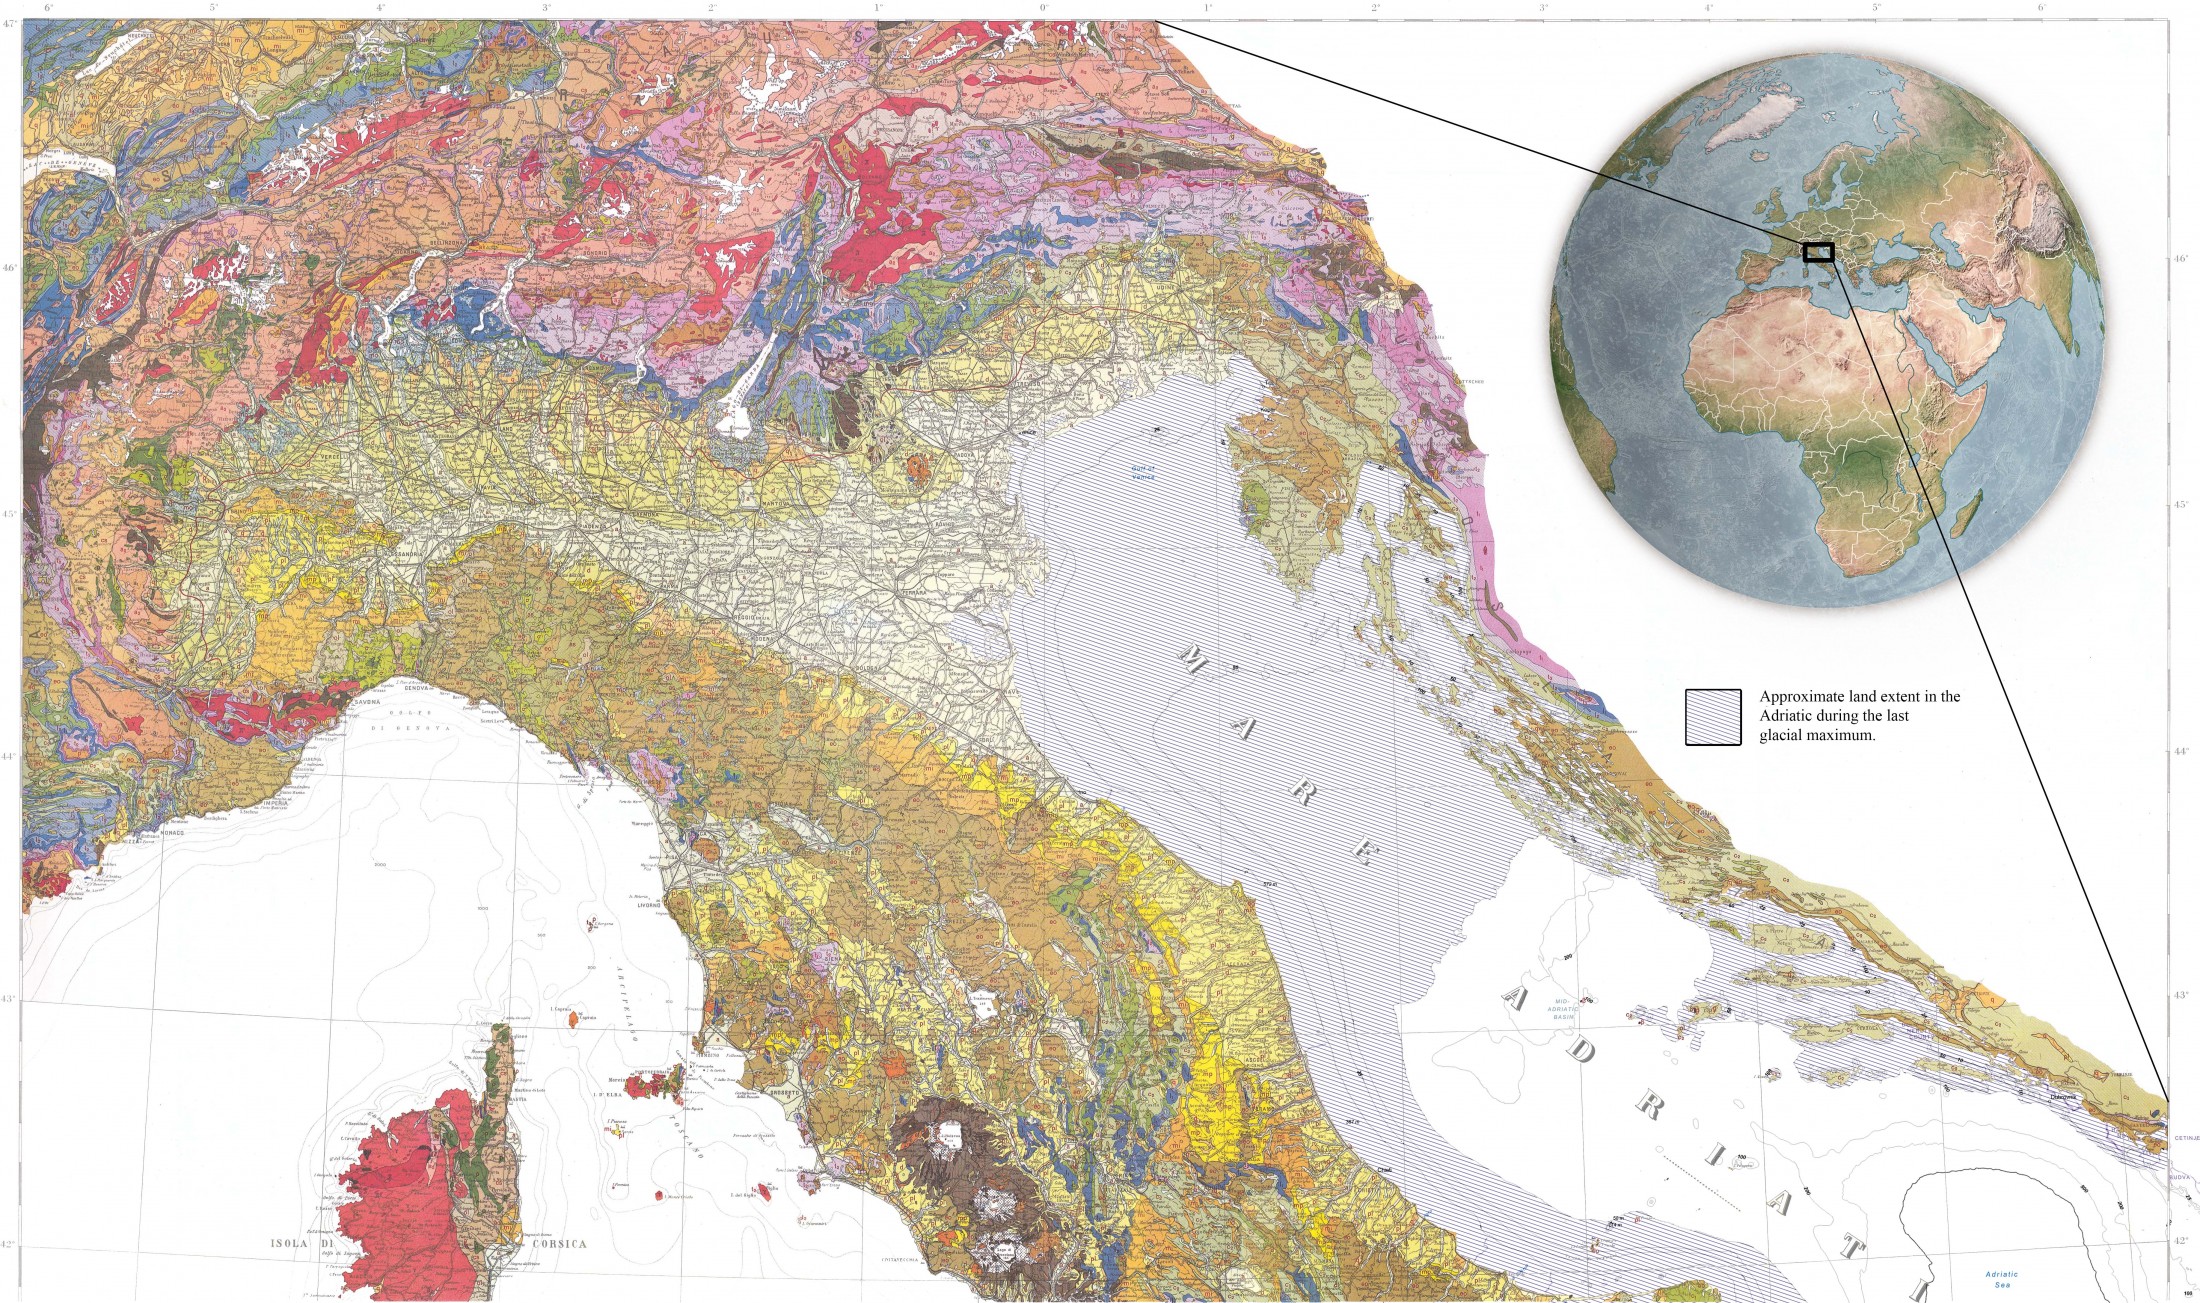 Geologic map of Italy showing extend of land in the Adriatic during the last ice age